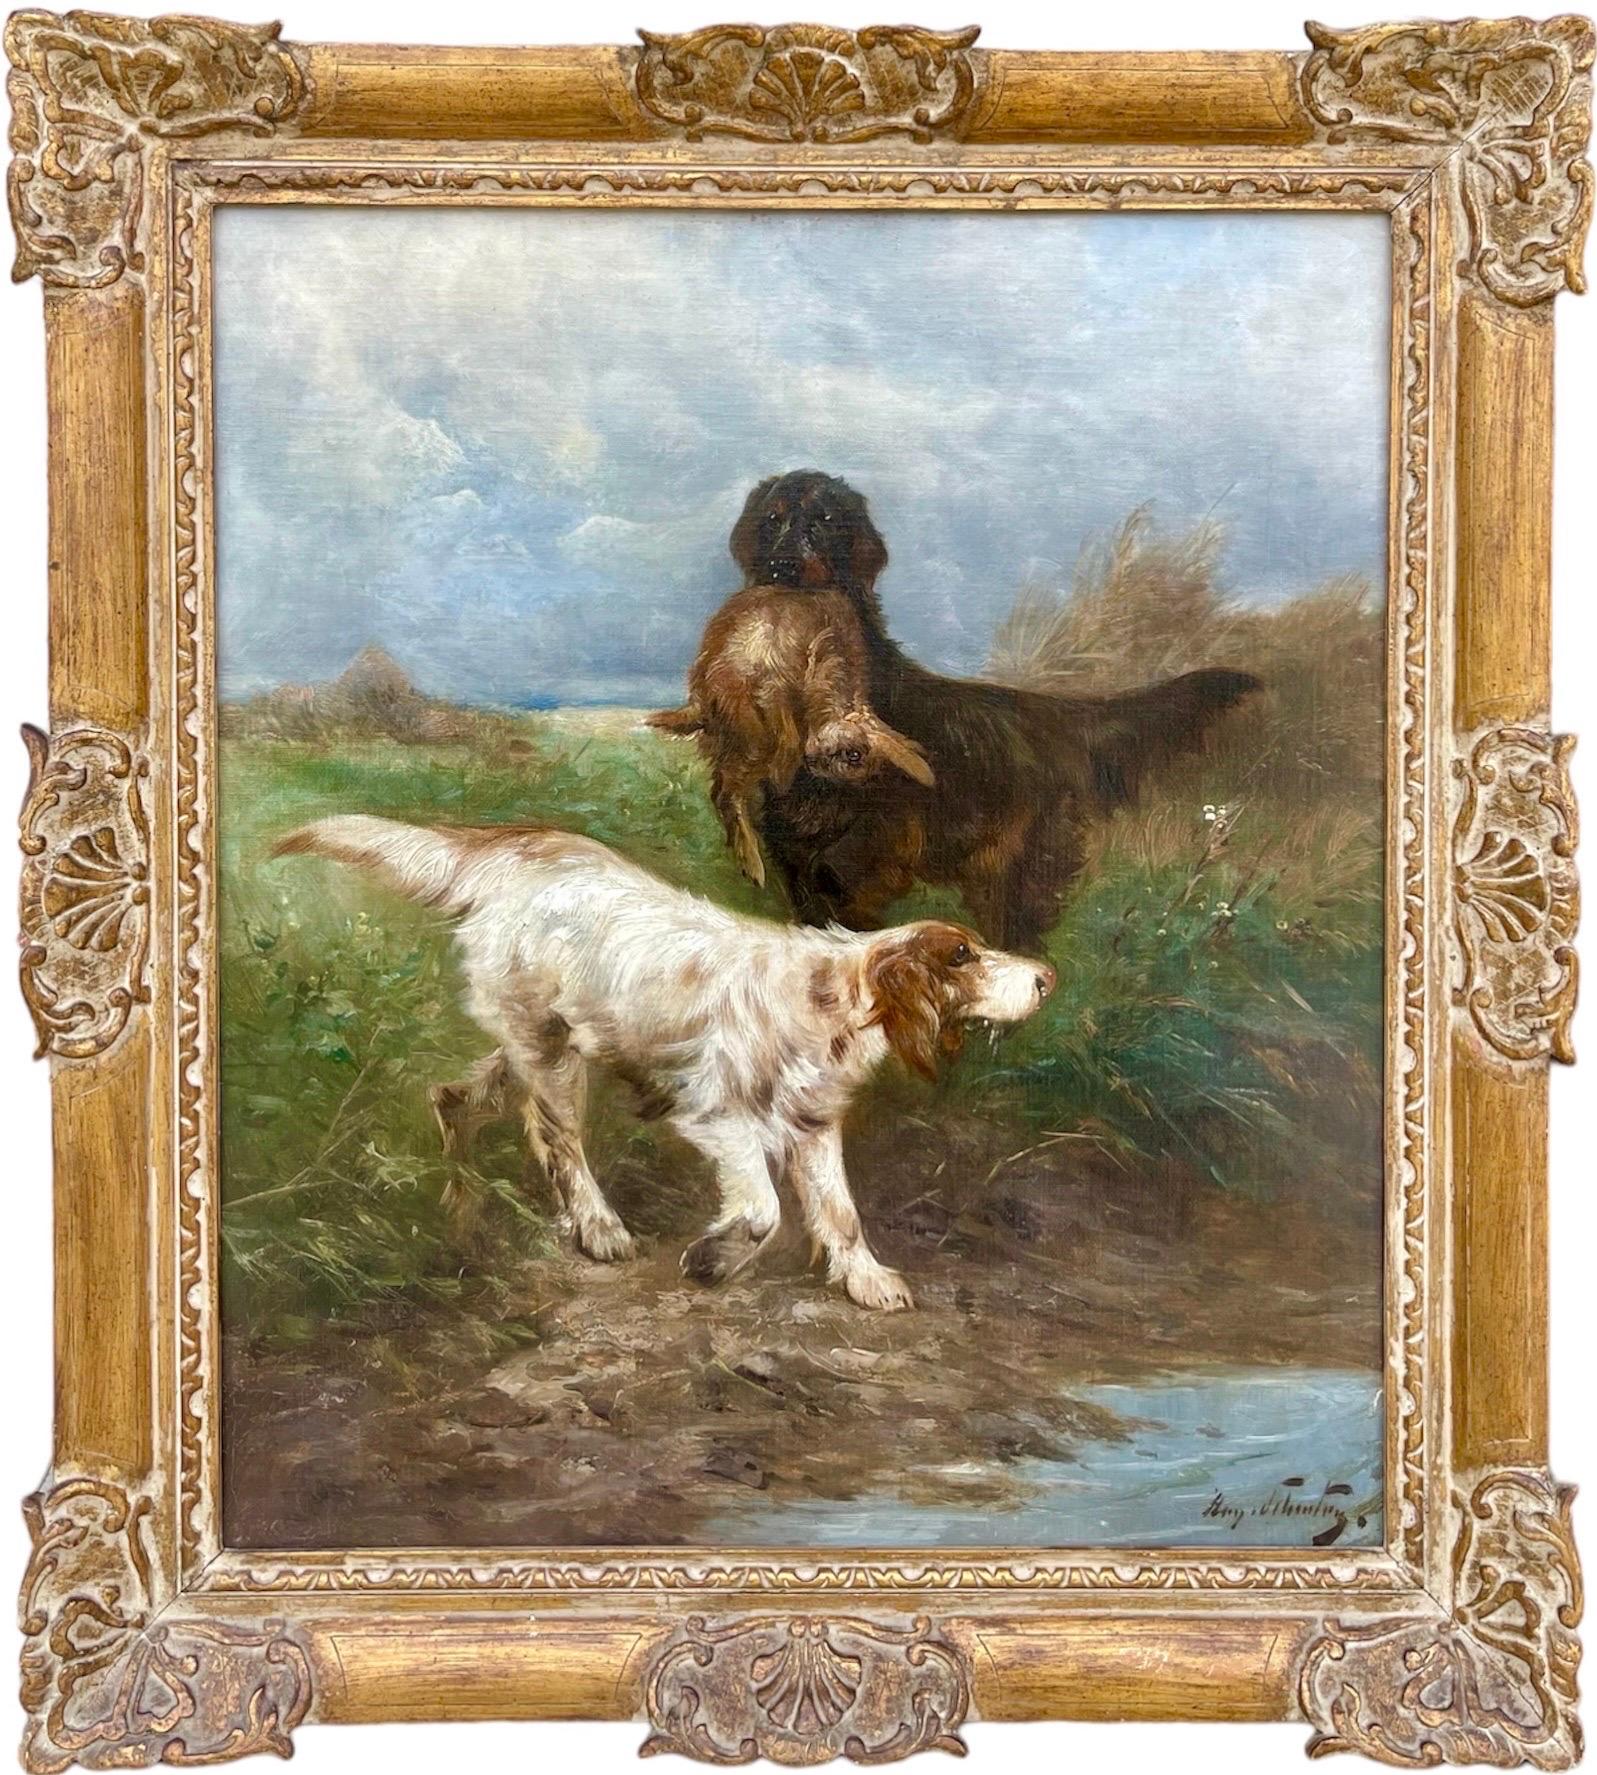 Henry Schouten Landscape Painting - 19th century Hunting scene - Setter dogs with their prey in a landscape - Hunt 